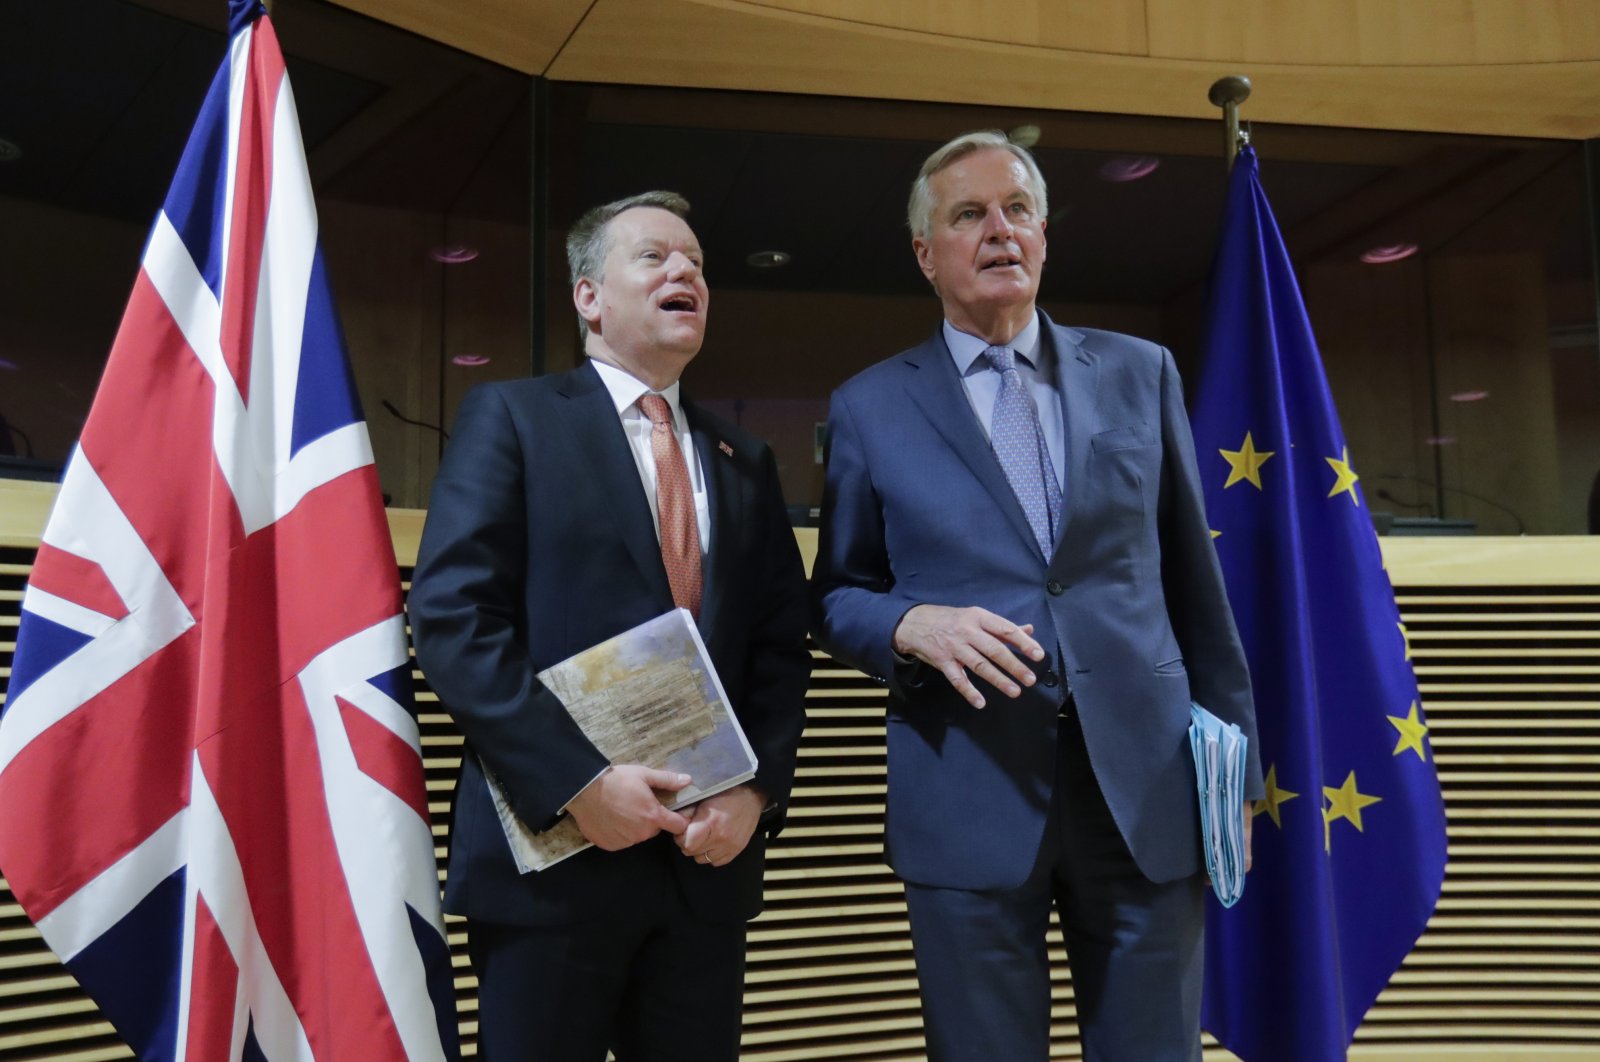 European Commission's Head of Task Force for Relations with the United Kingdom Michel Barnier, right, speaks with the British Prime Minister's Europe adviser David Frost at EU headquarters, Brussels, March 2, 2020. (AP Photo)